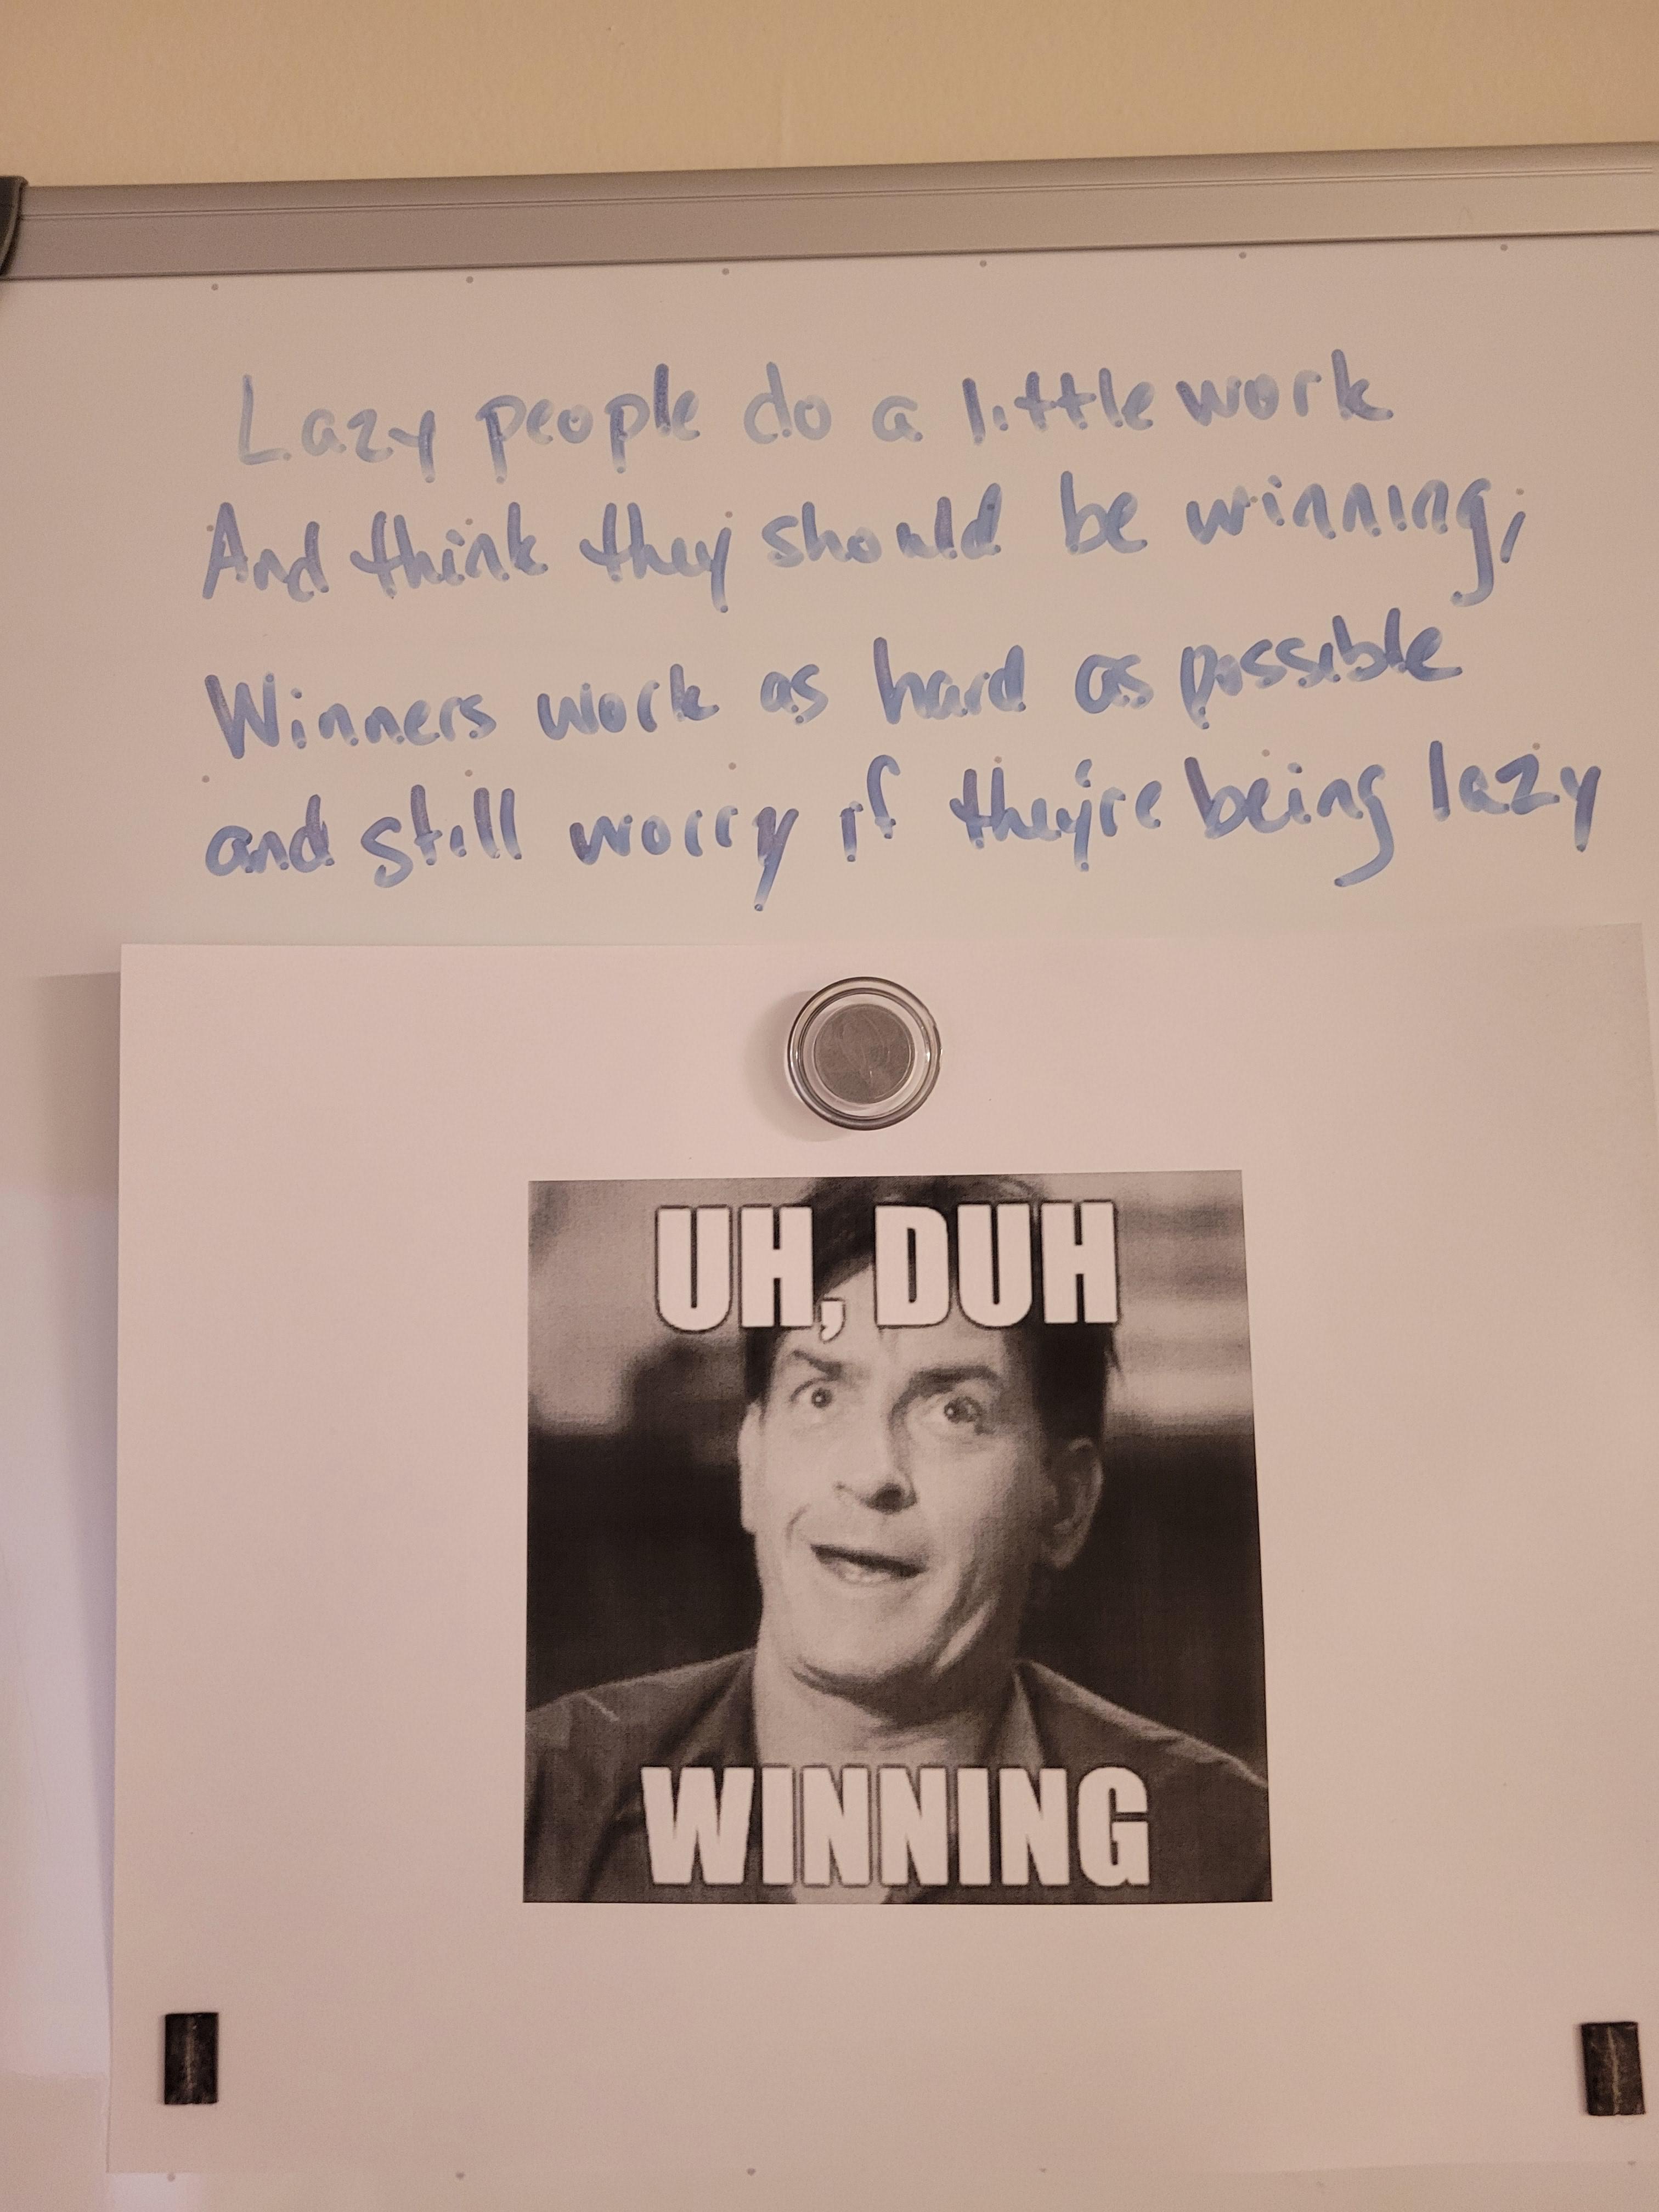 anitwork memes - picture frame - Lazy people do a little work And think they should be winnlag, Winners work as hard as possible and still worry of theire being lazy Uh Duh Winning